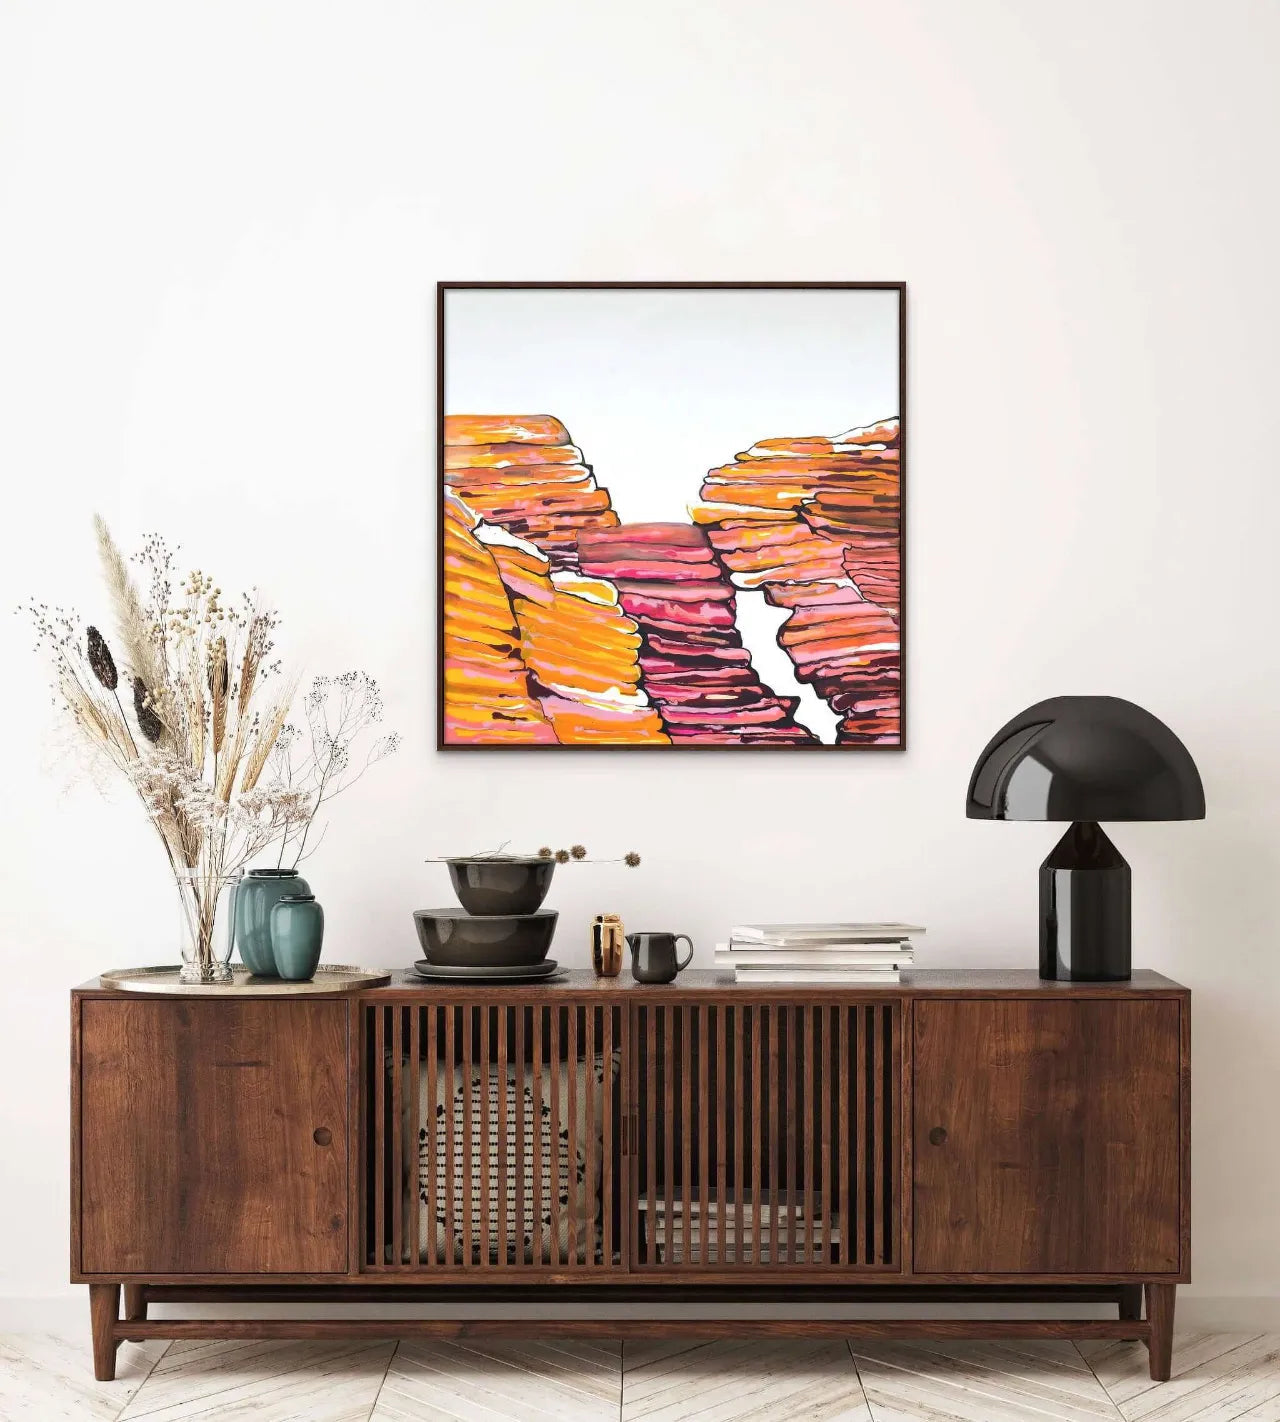 Abstract-Artwork-by-Sung-Lee-Pancake-Rocks-Chromaluxe-Limited-Edition-Print-Cabinet